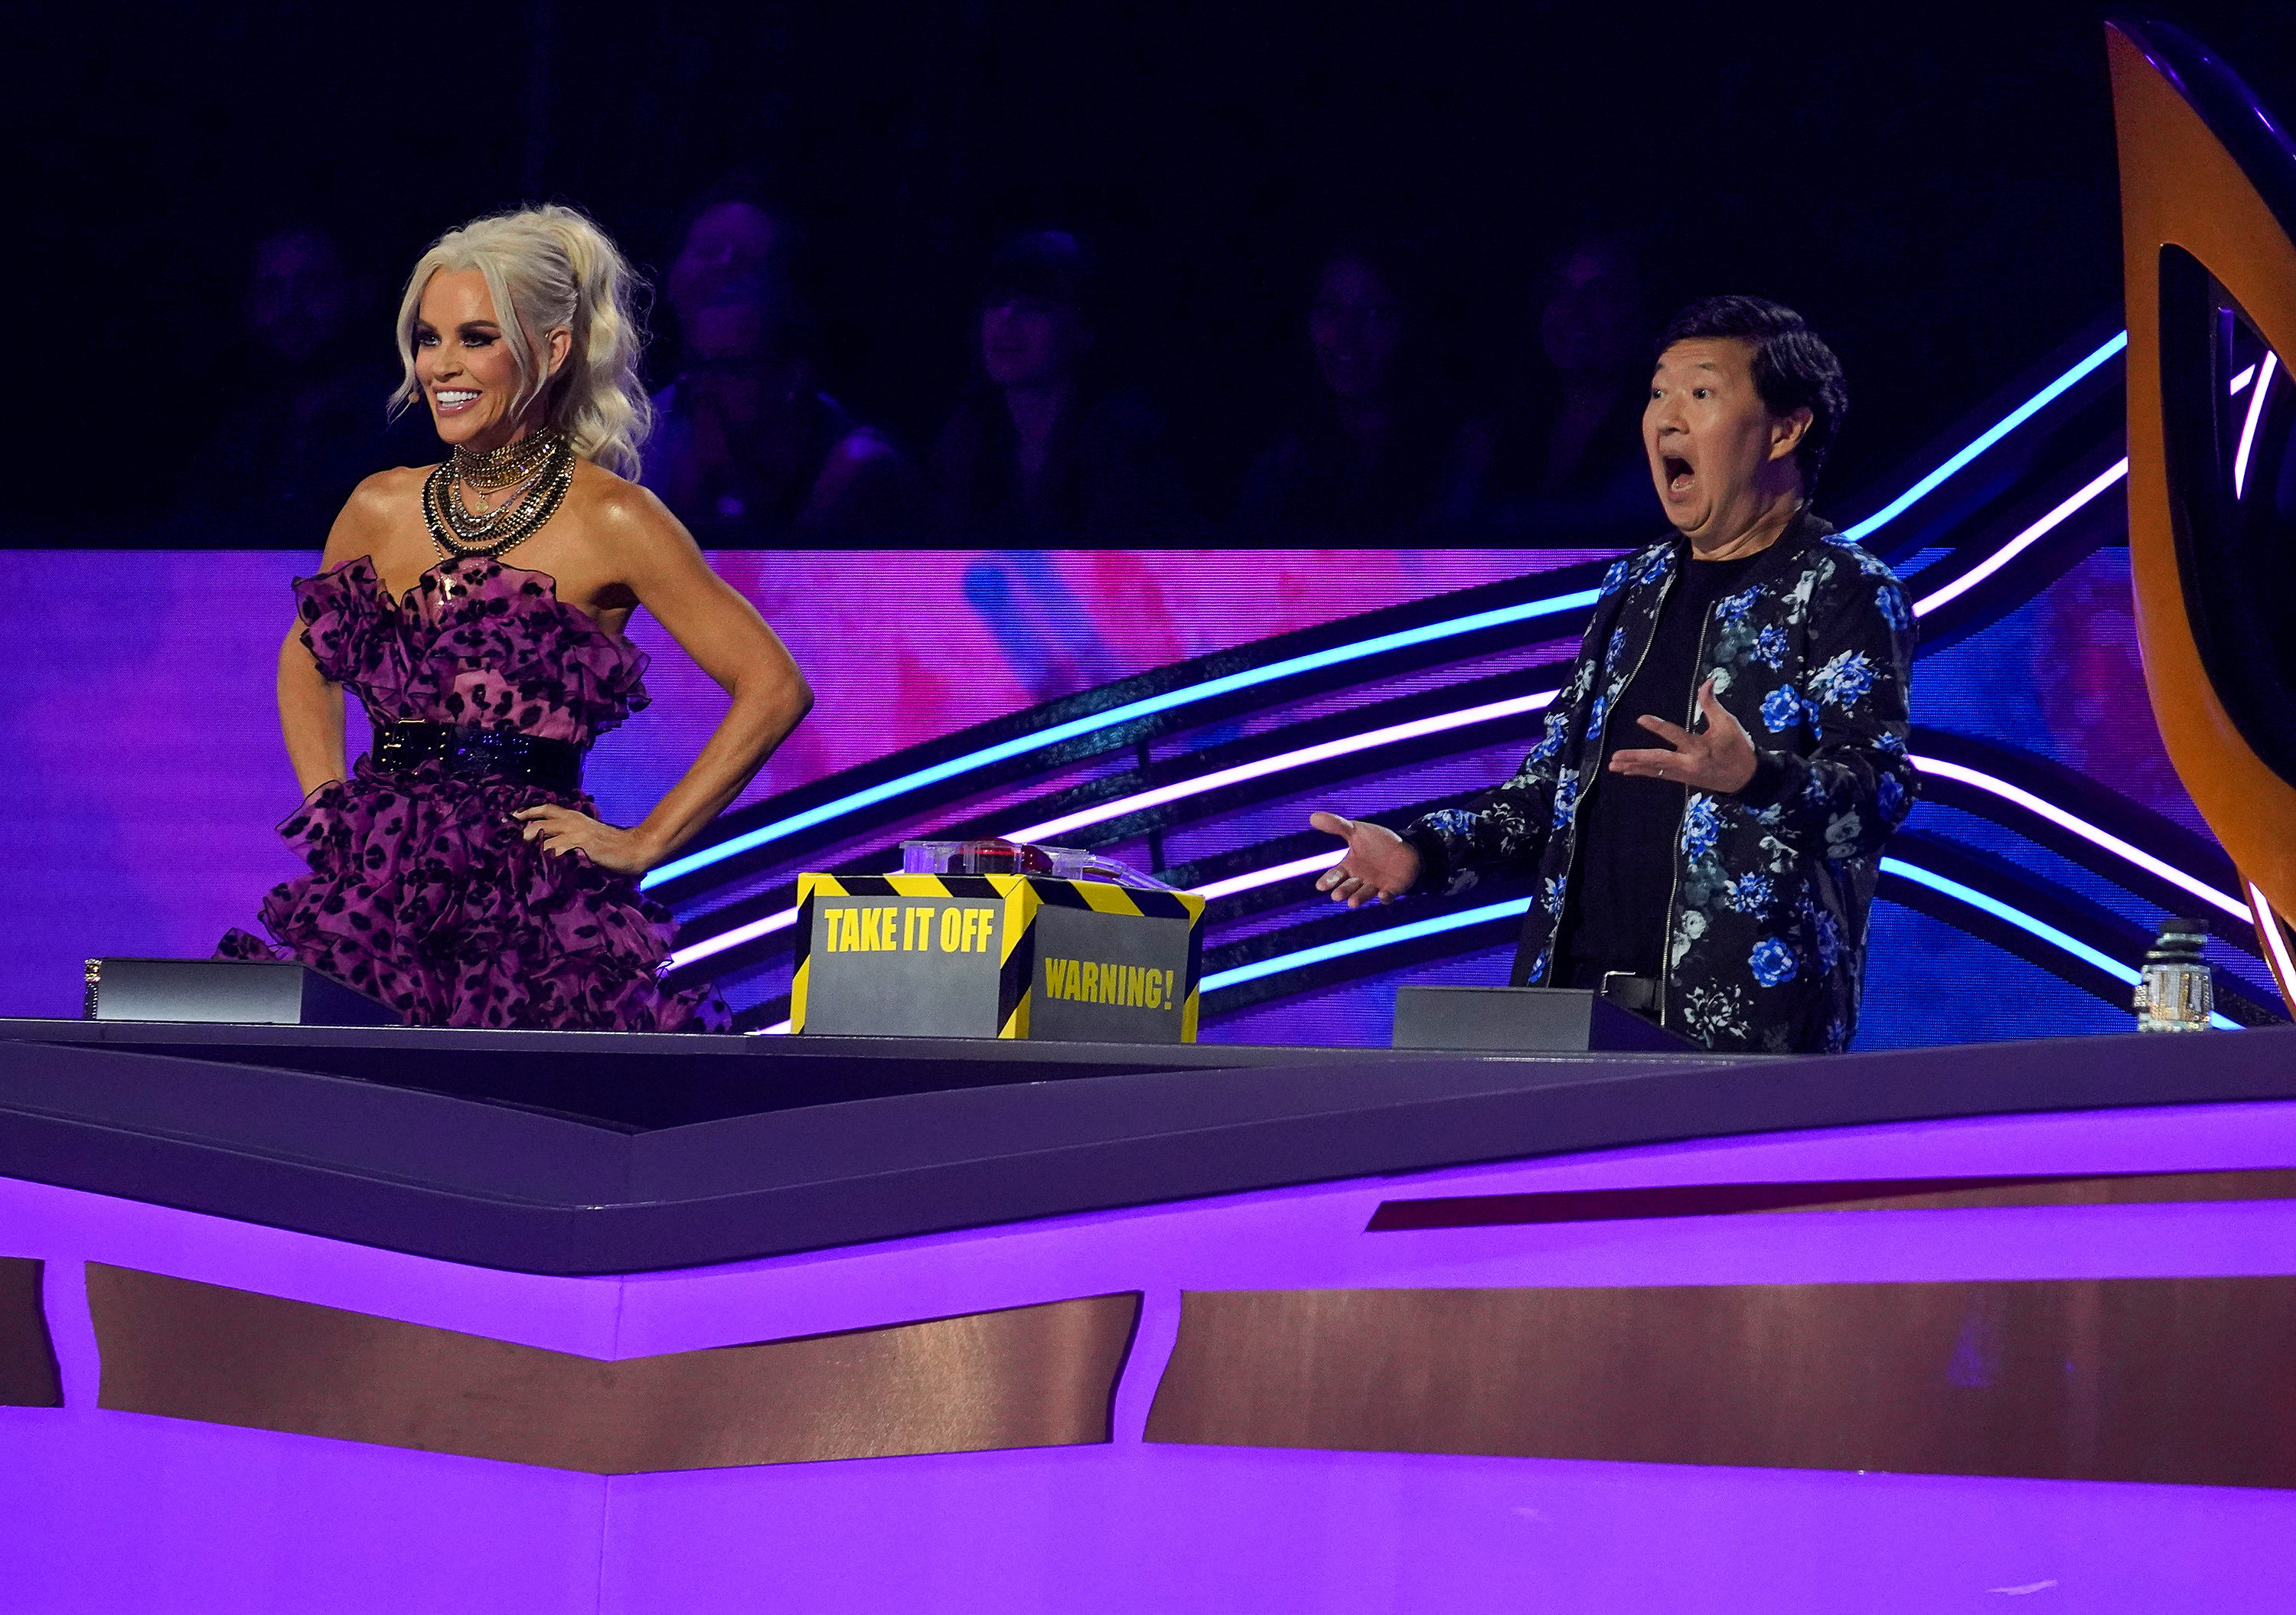 Jenny McCarthy and Ken Jeong as judges on season 6 of The Masked Singer, which recently unmasked Rudy Giuliani